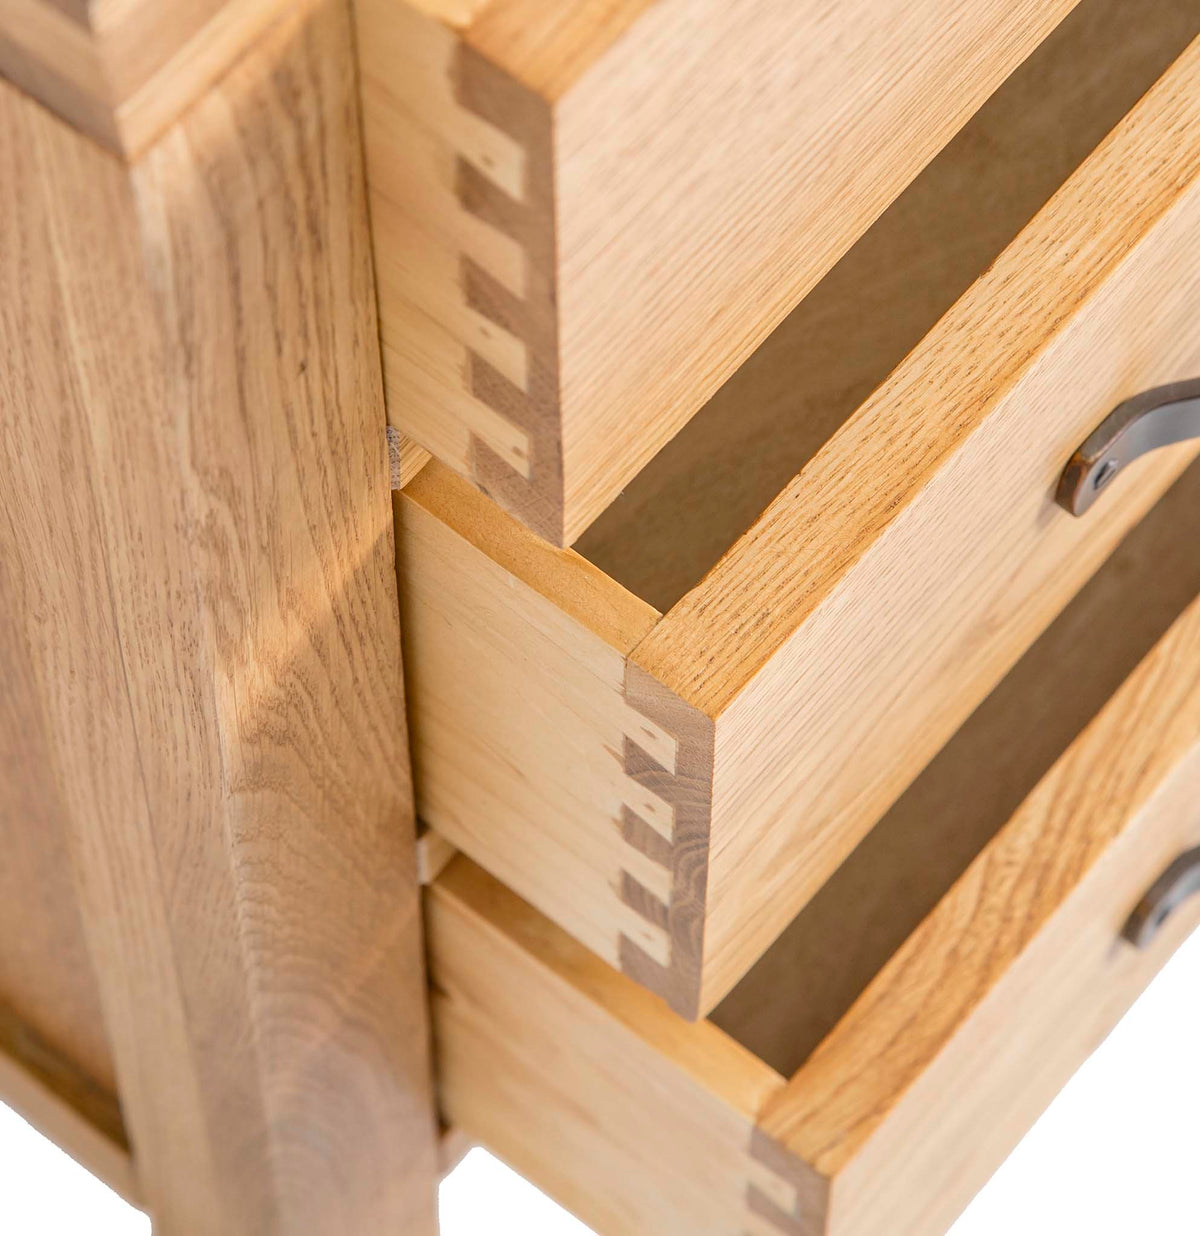 Abbey Waxed 3 Drawer Small Oak Bedside Table - Close up of dovetail joints on drawers